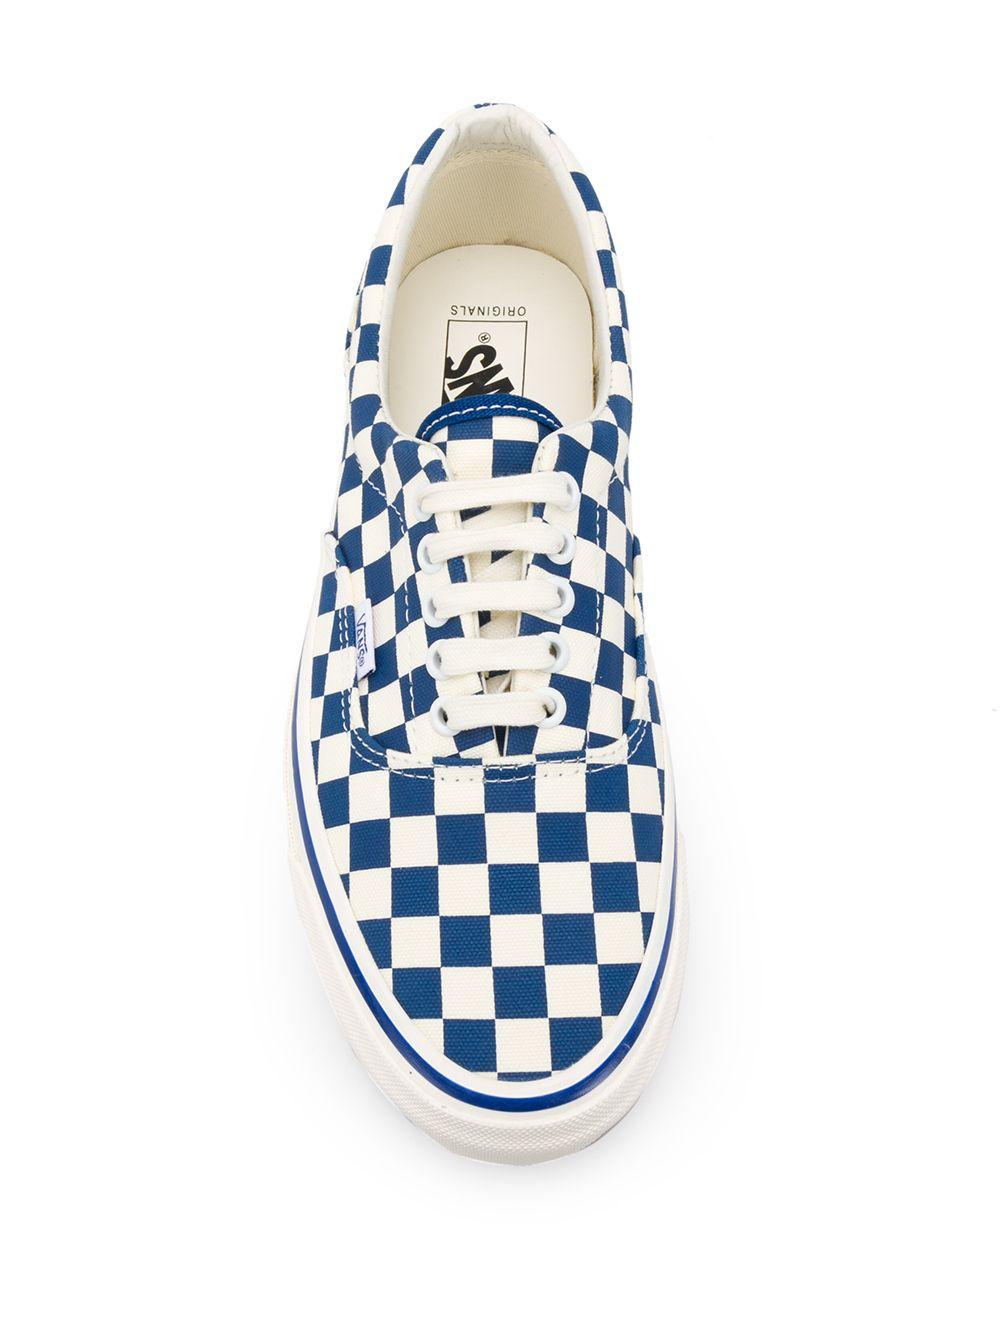 Vans Rubber Checkerboard Lace-up Sneakers in Blue - Lyst